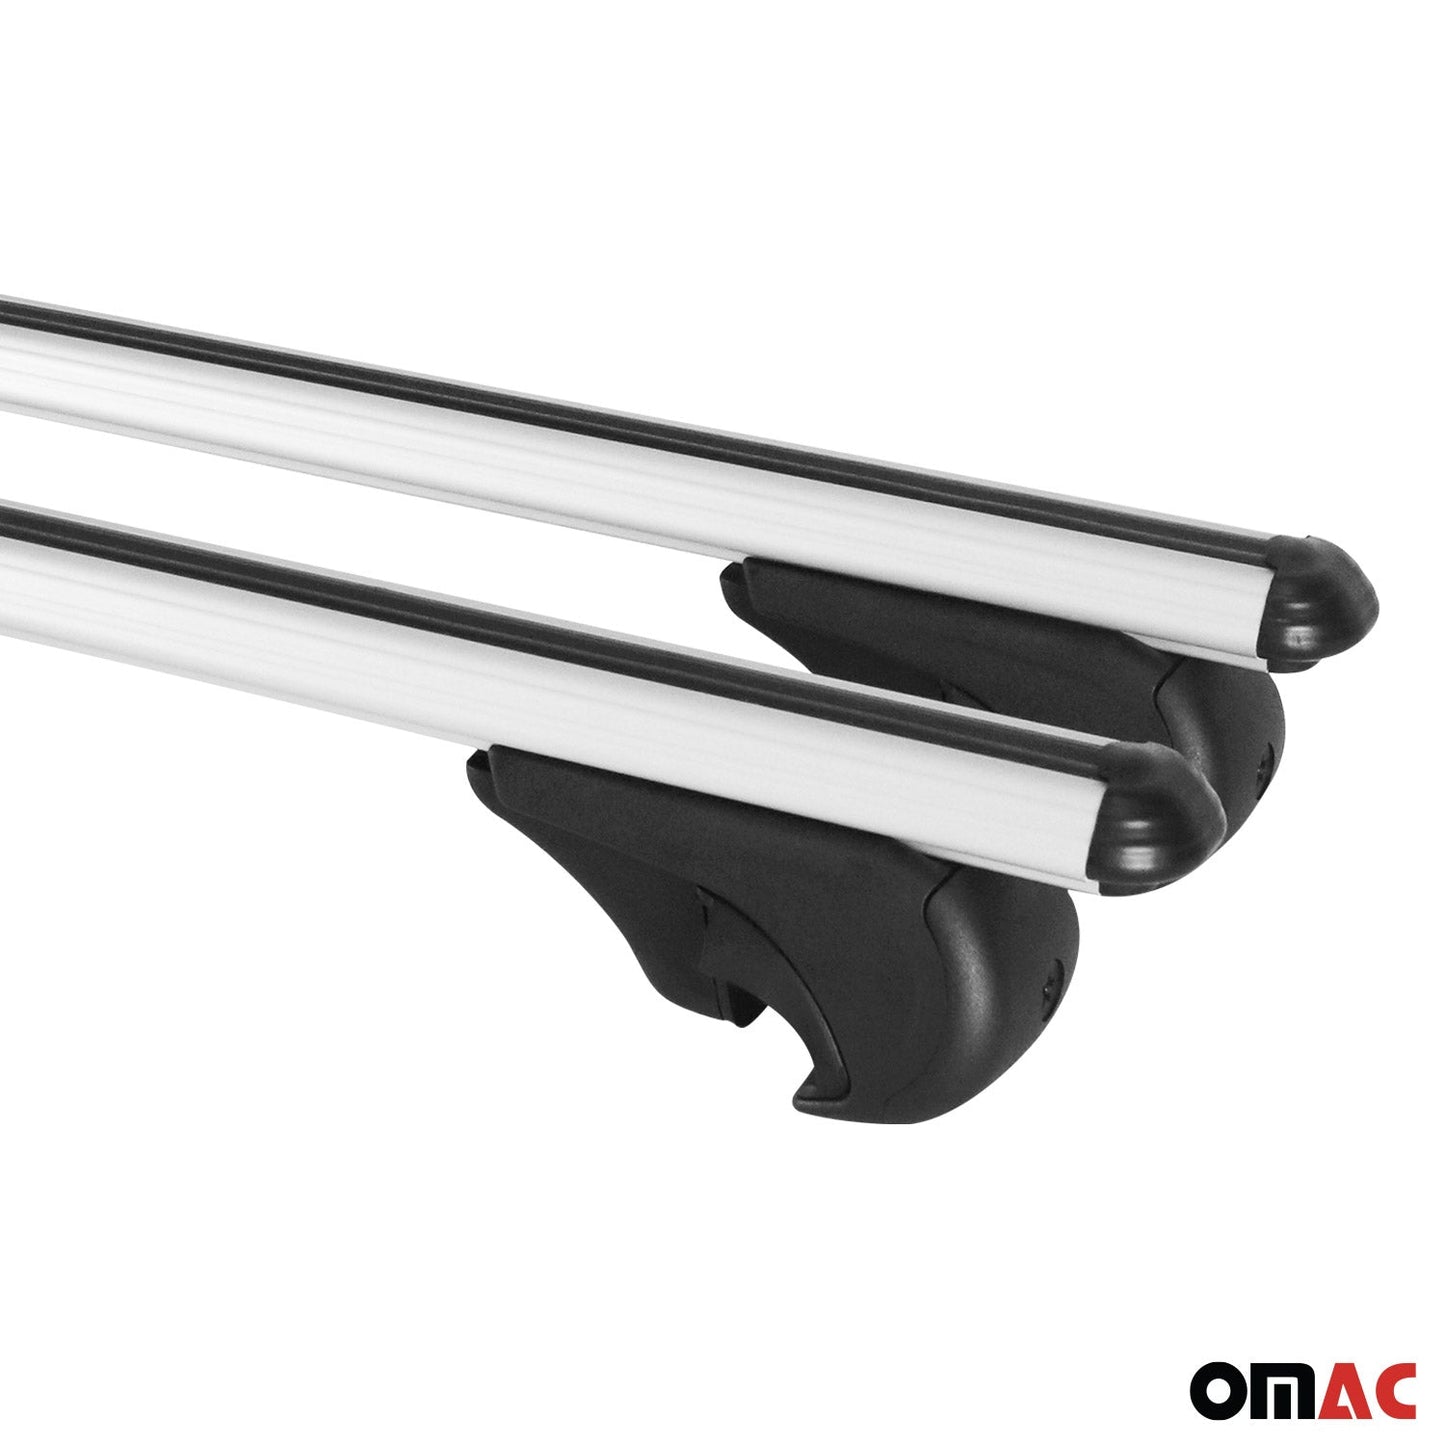 OMAC Lockable Roof Rack Cross Bars Luggage Carrier for Cadillac SRX 2004-2016 Gray 21029696929M